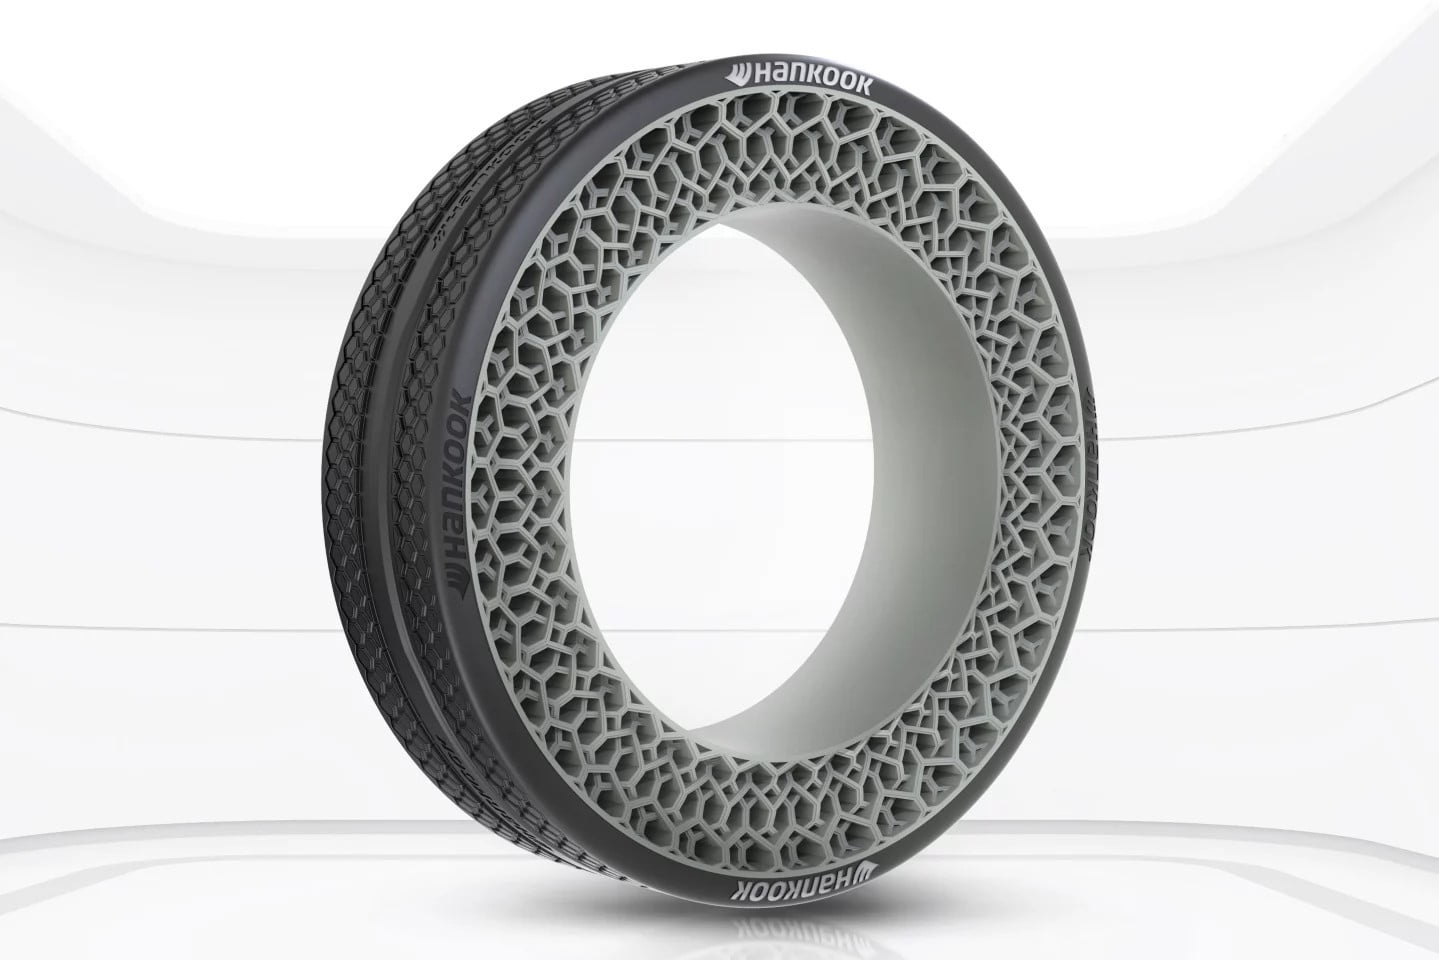 No punctures: Hankook introduces its airless tire